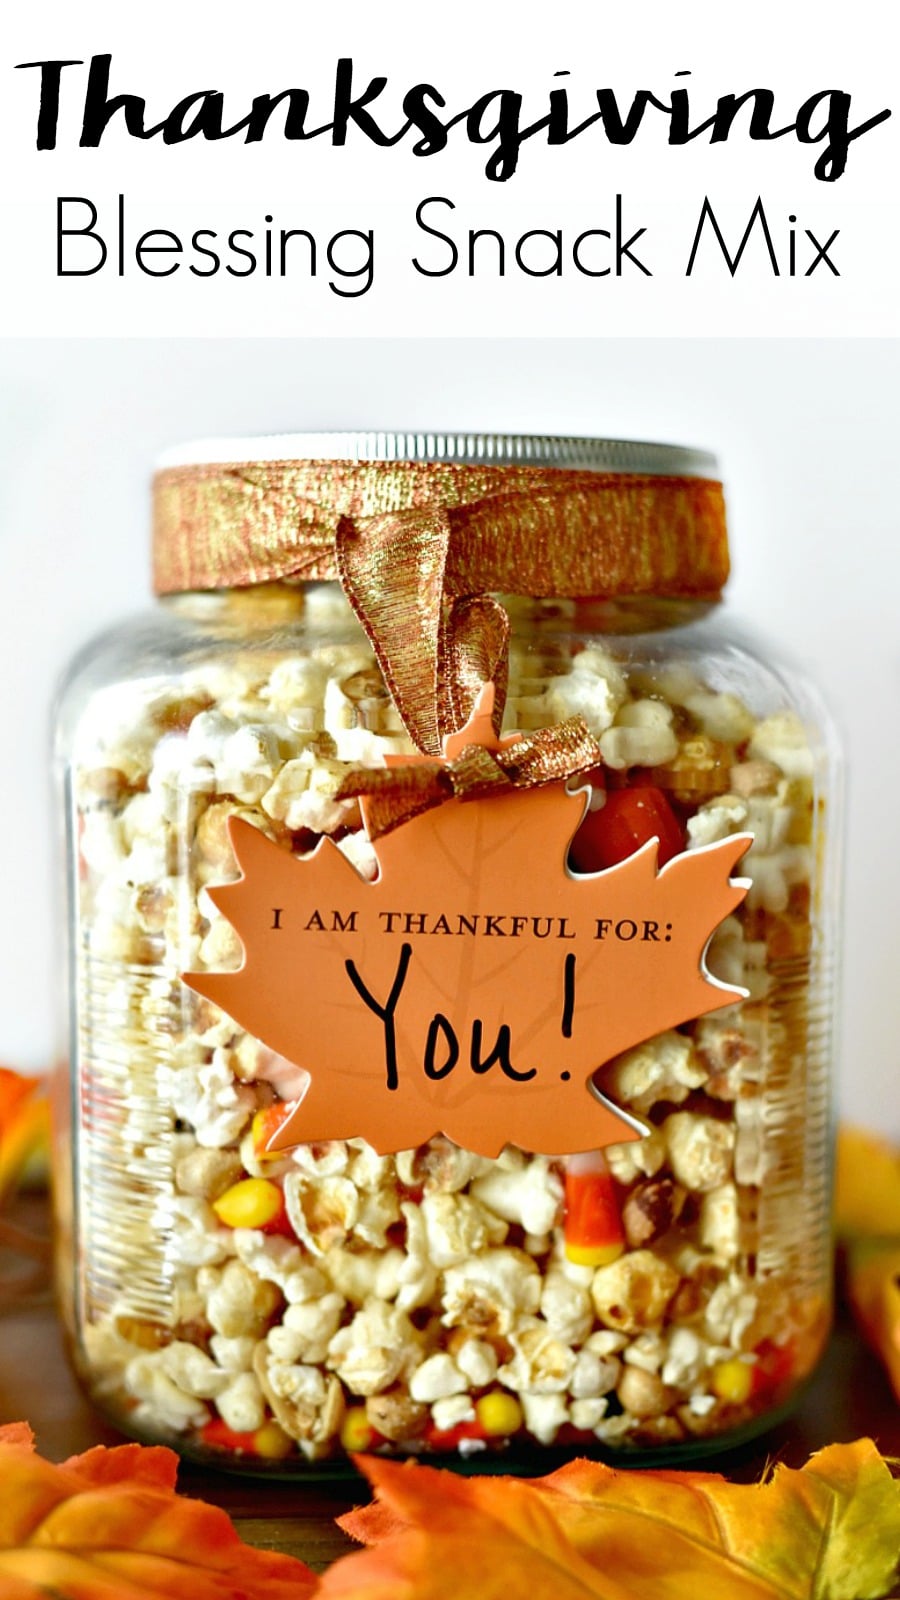 November is the time to give thanks. An easy (and delicious) way to say thanks to teachers is with this Thanksgiving Blessing Snack Mix Recipe!